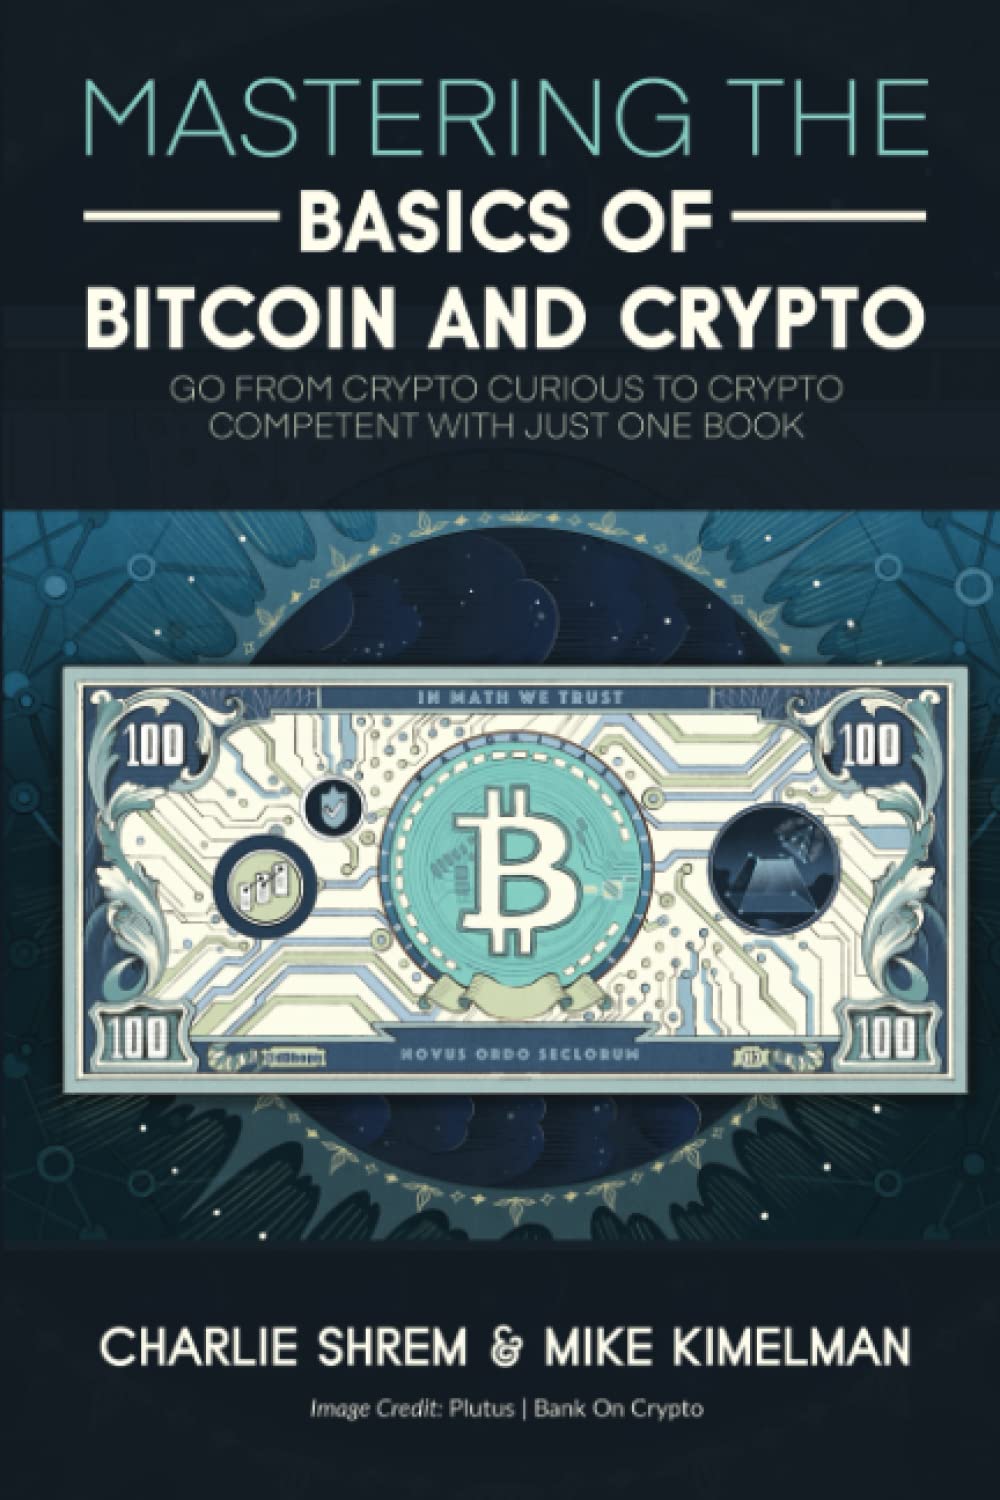 New book "Mastering the Basics of Bitcoin and Crypto" by Charlie Shrem and Mike Kimelman is released, a step-by-step guide to understanding cryptocurrency and start trading with ease 